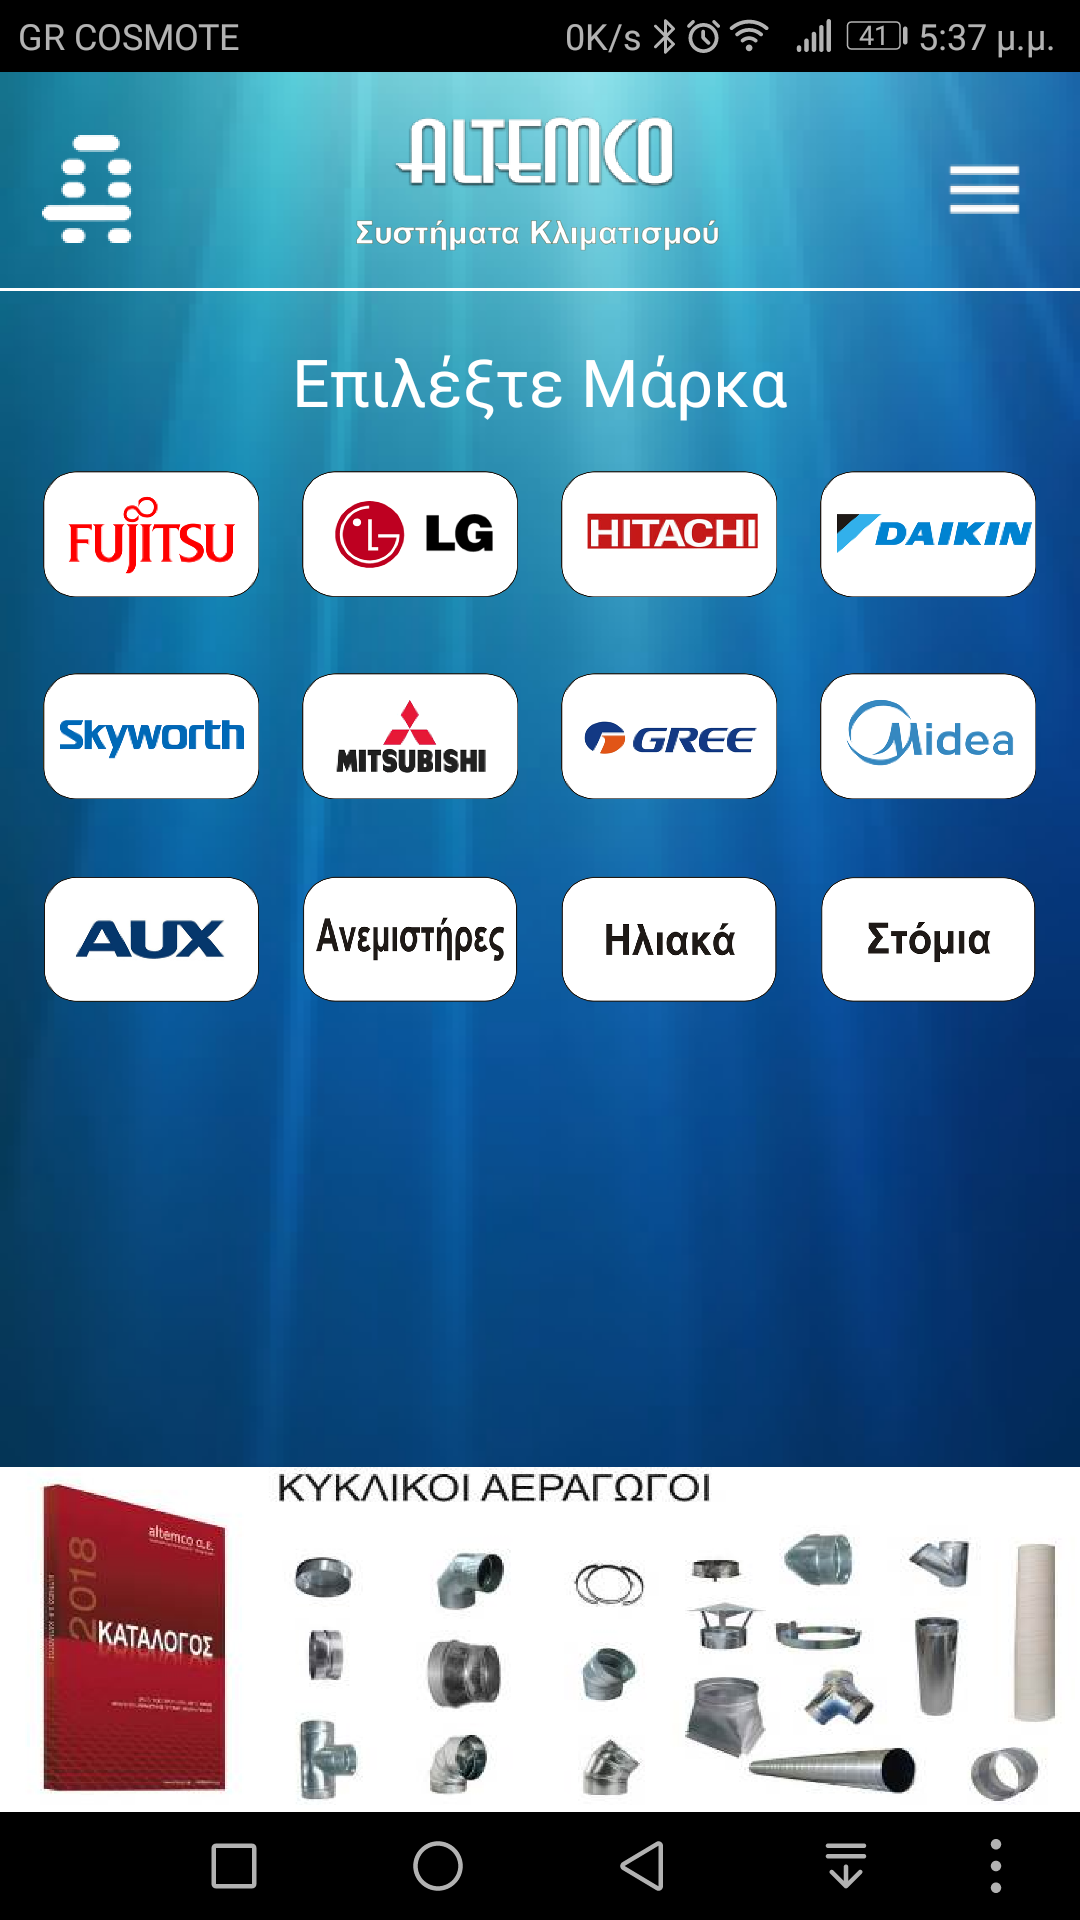 ALTEMCO HVAC for Android - APK Download - 